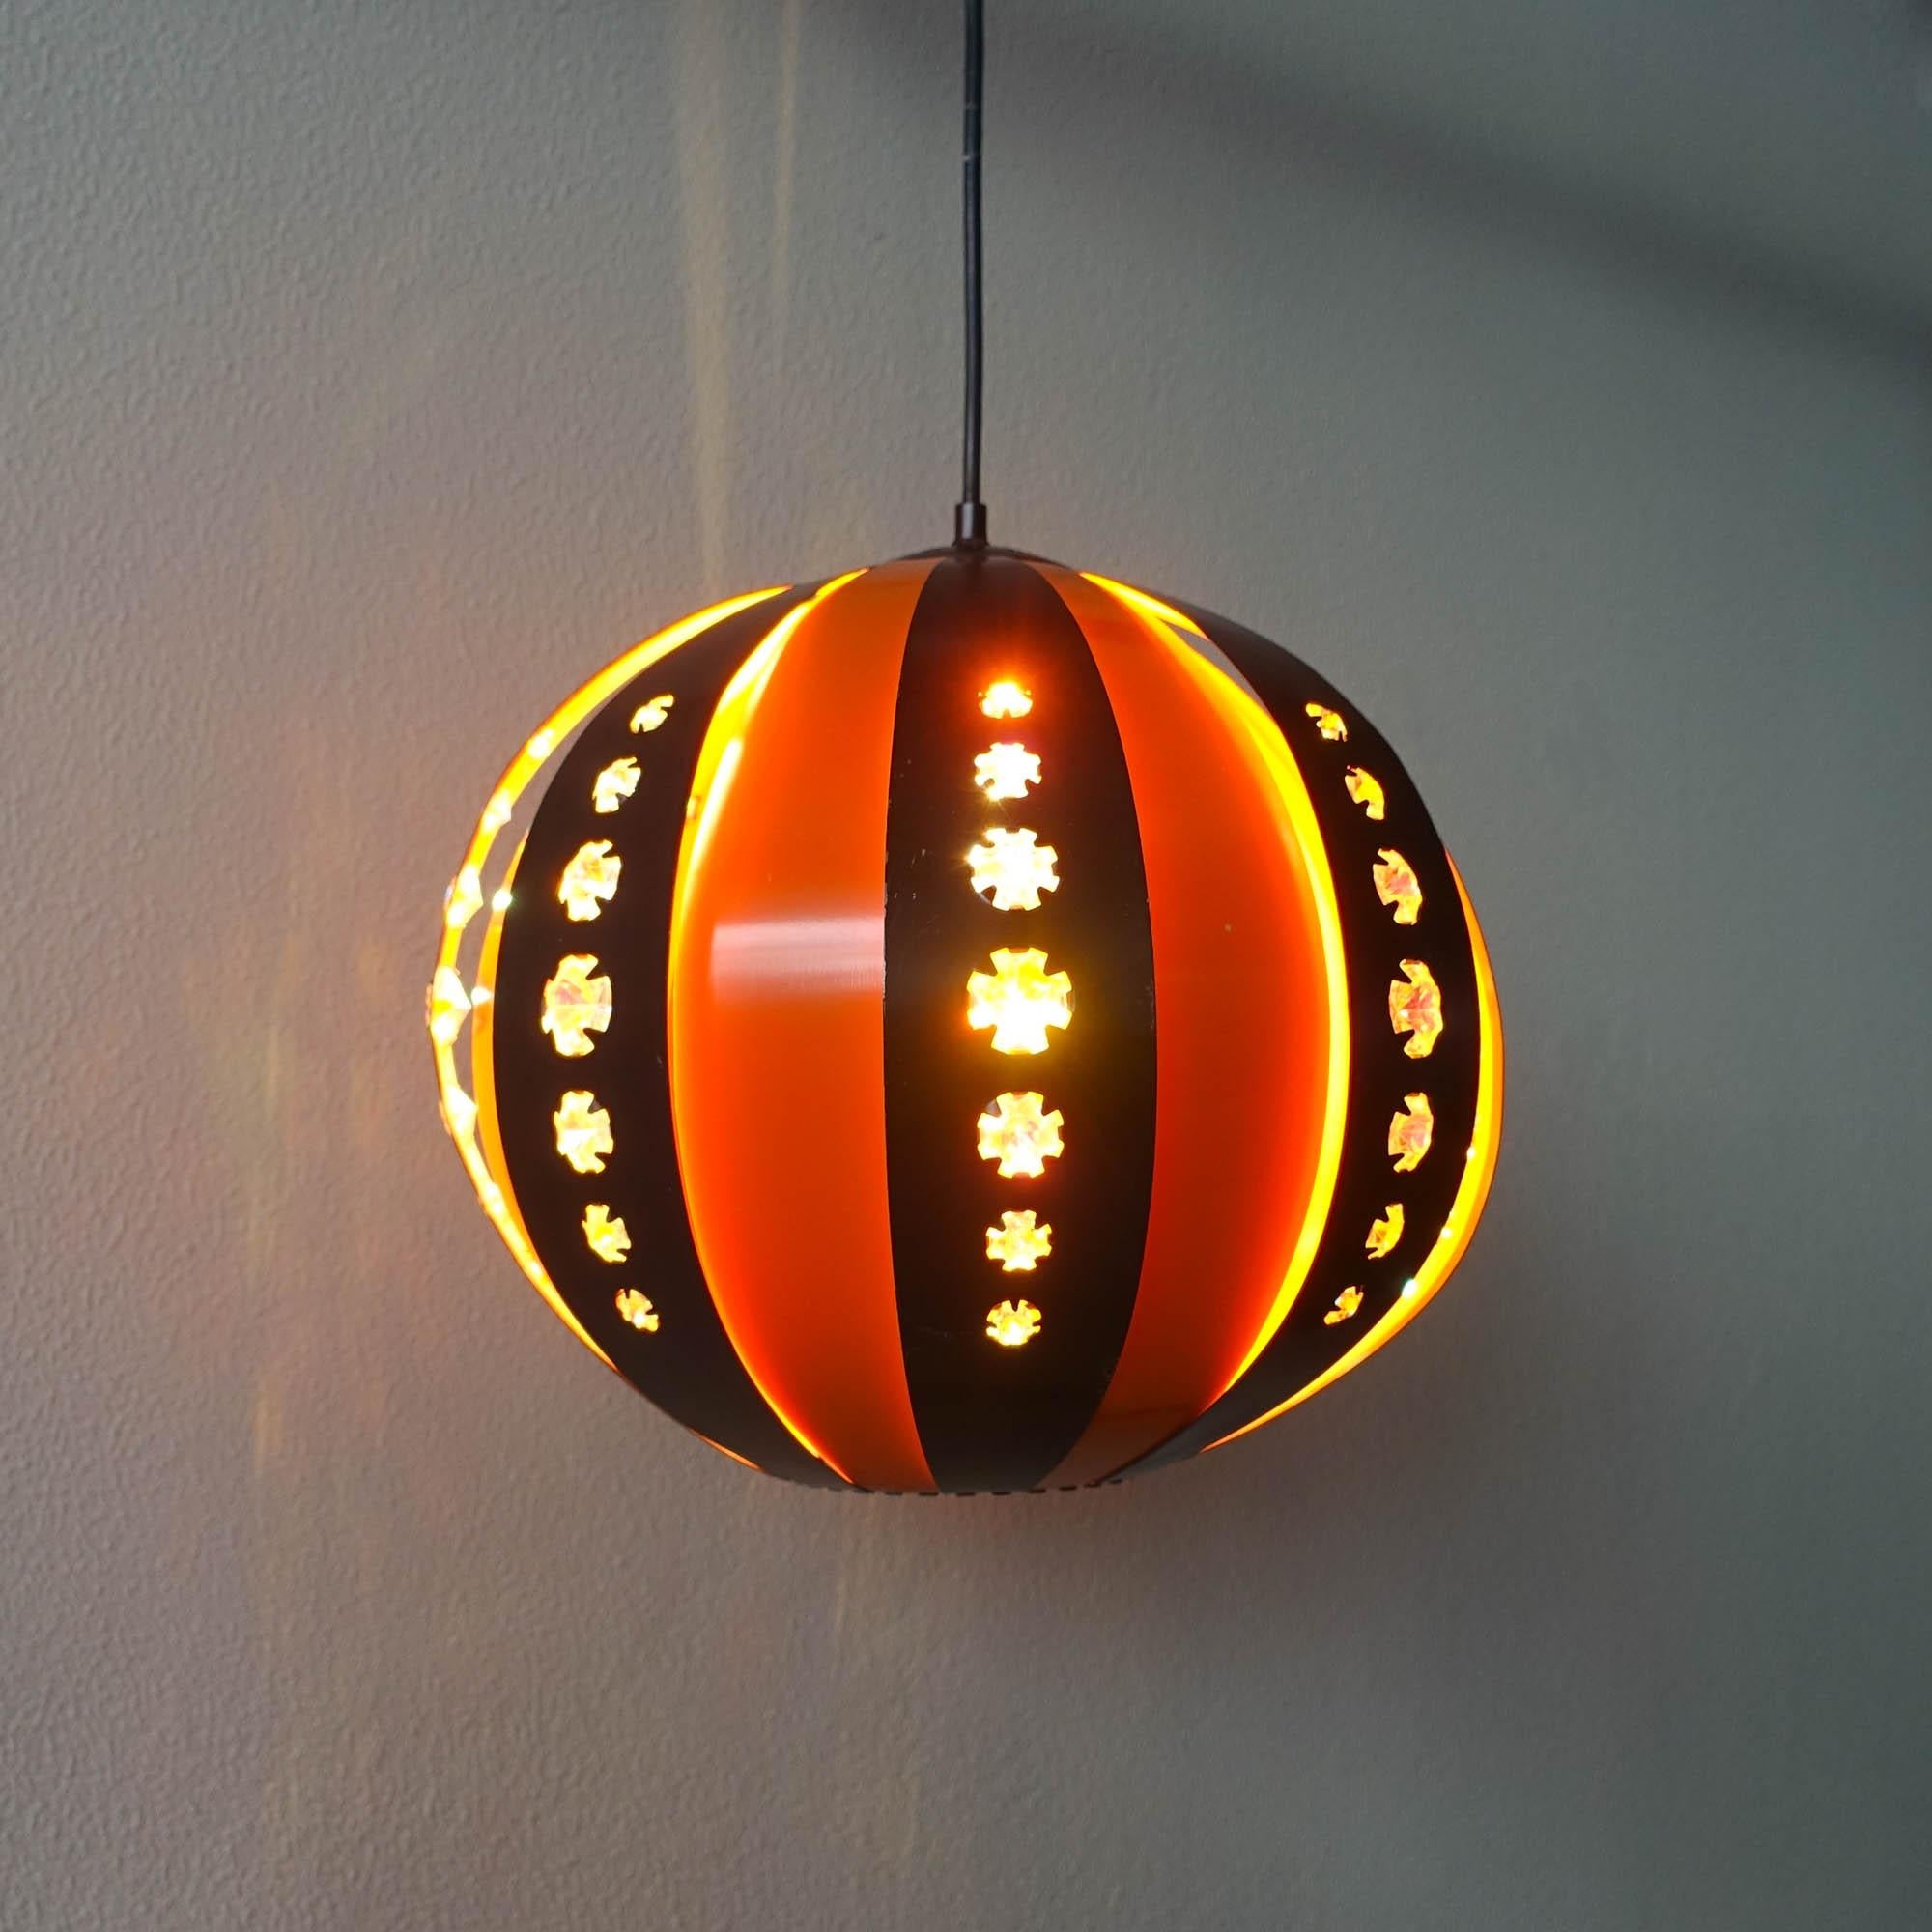 Werner Schou Pendant Light for Coronell Elektro, 1970's For Sale 7